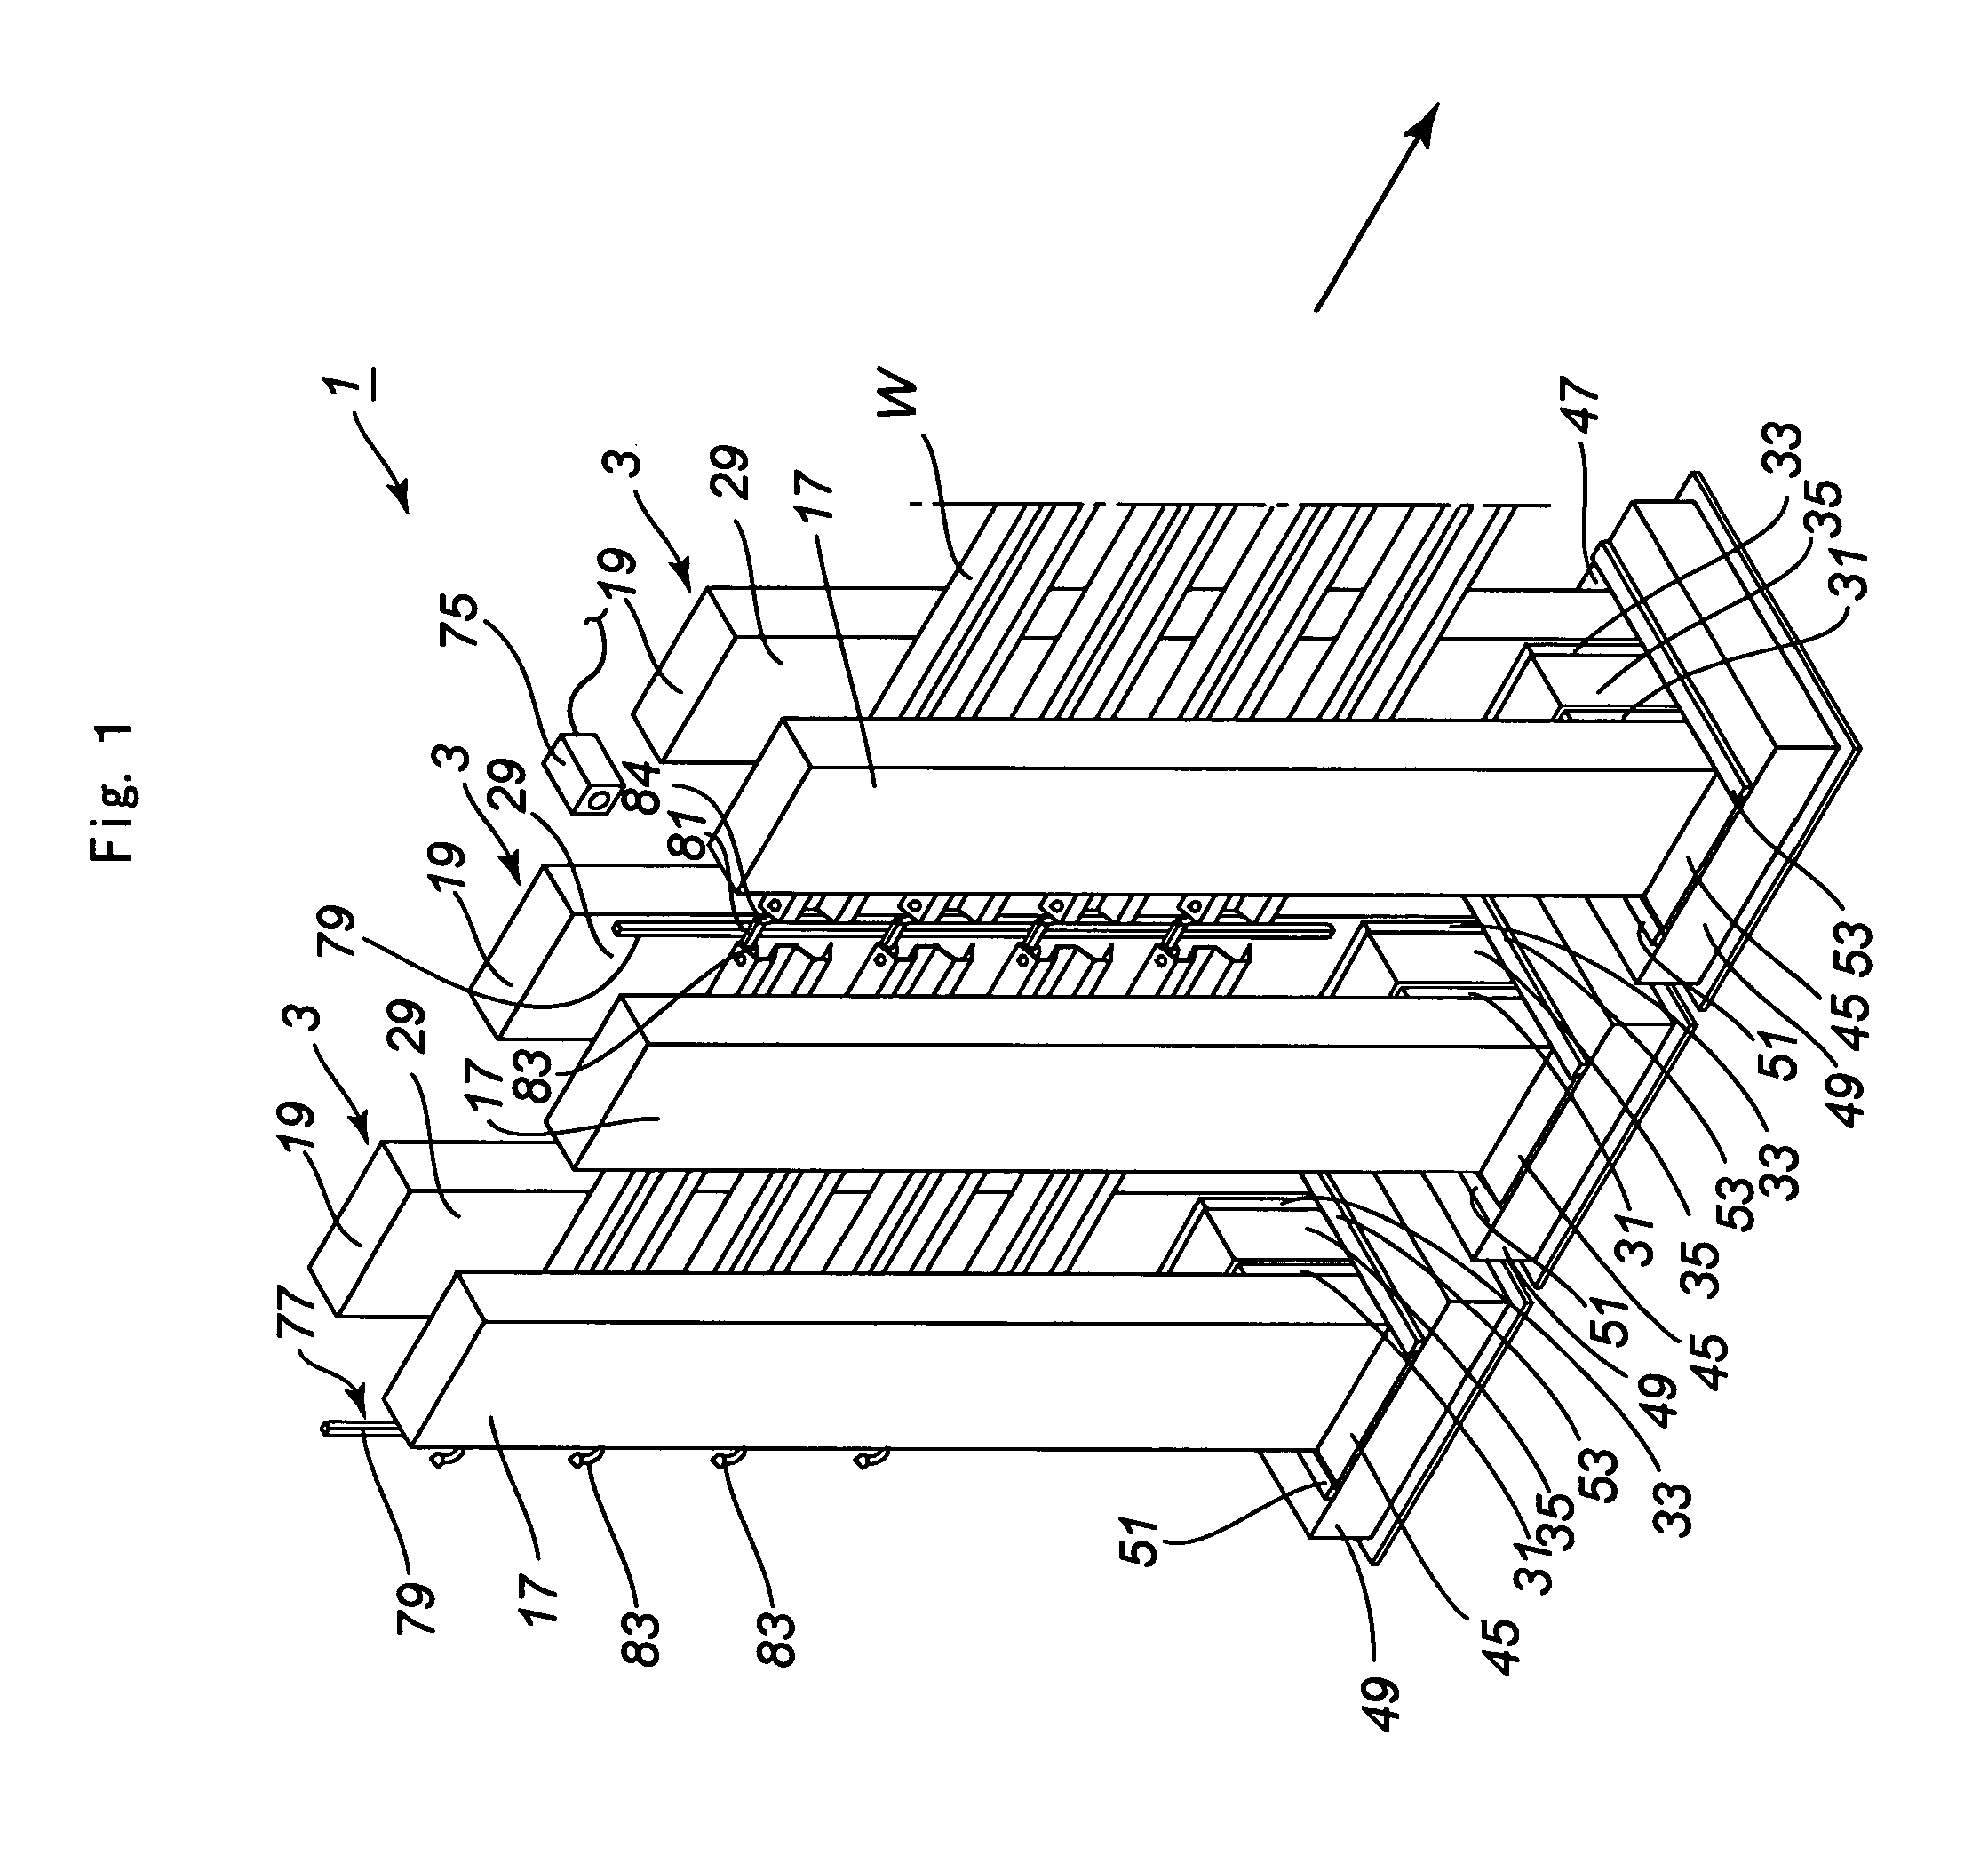 Apparatus and method for heating works uniformly through high frequency induction coils